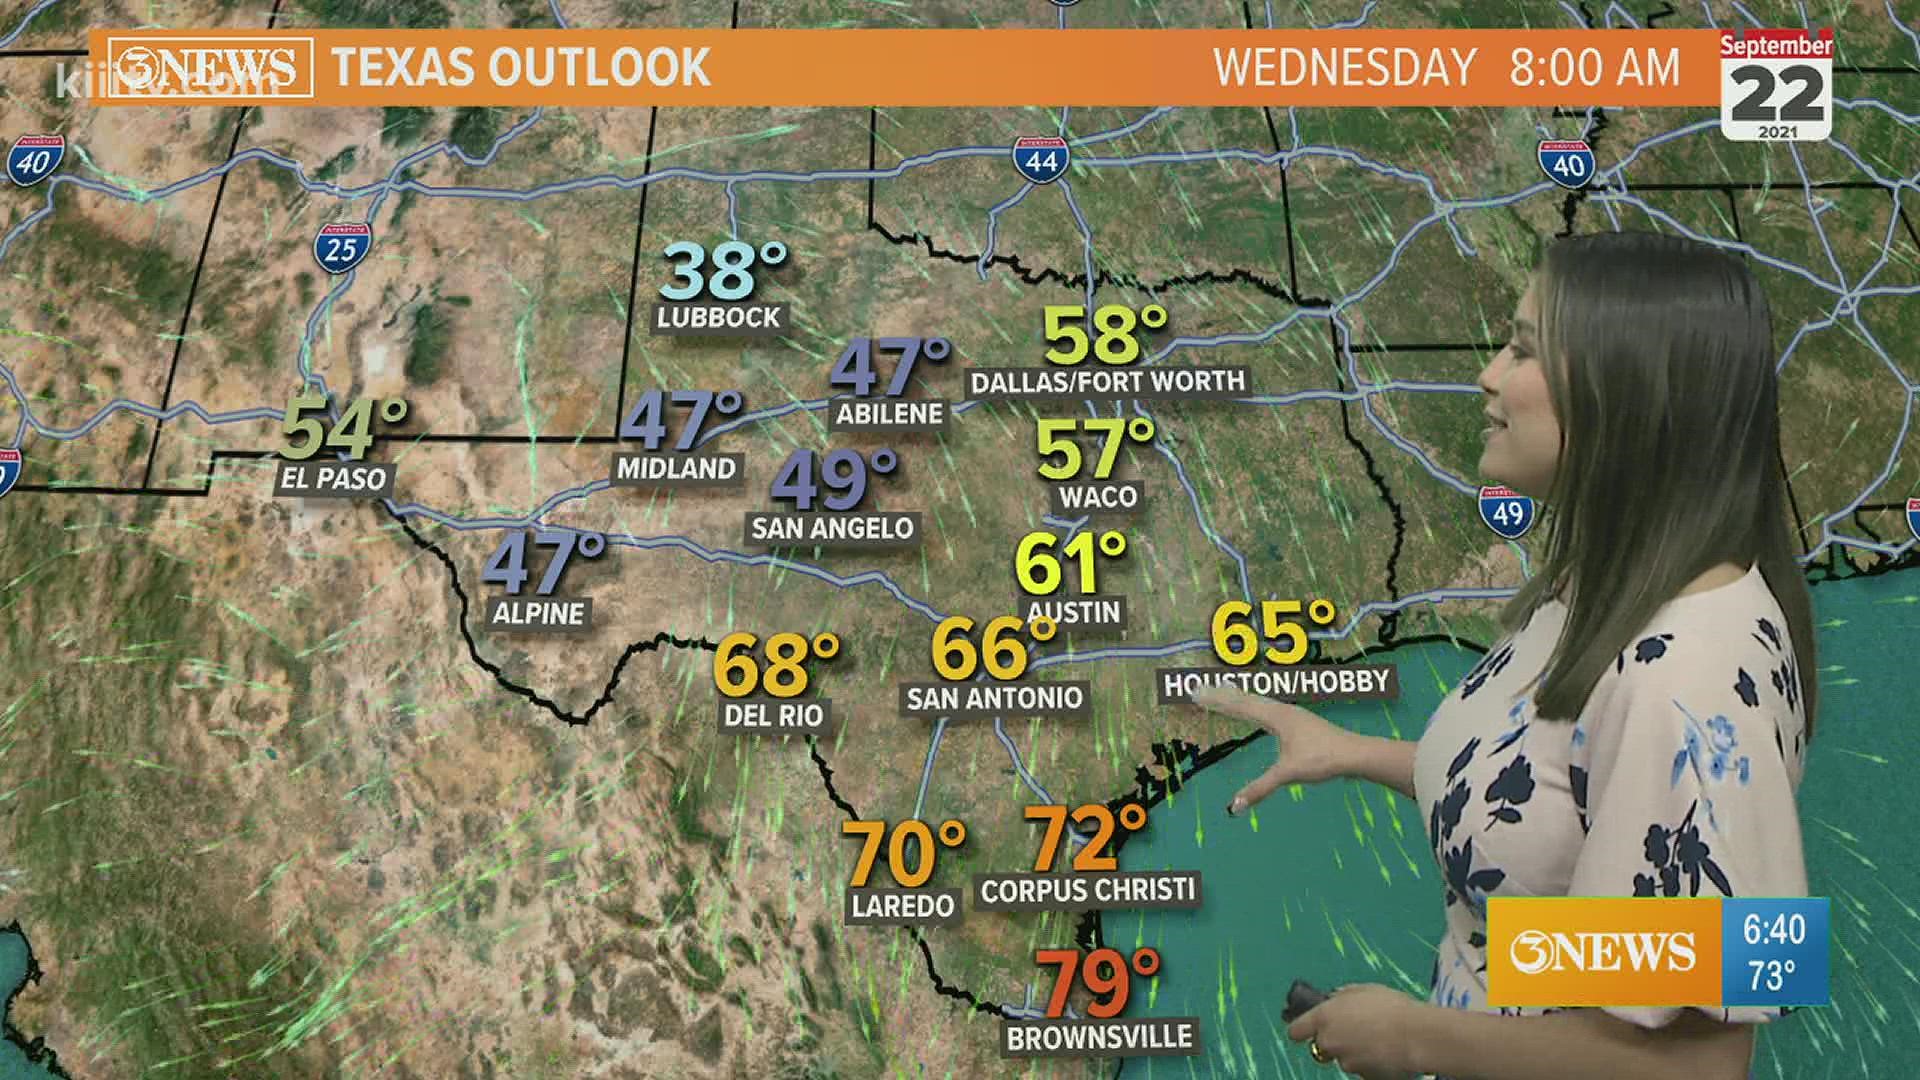 Clear and sunny end to the weekend. Texans await cold front.